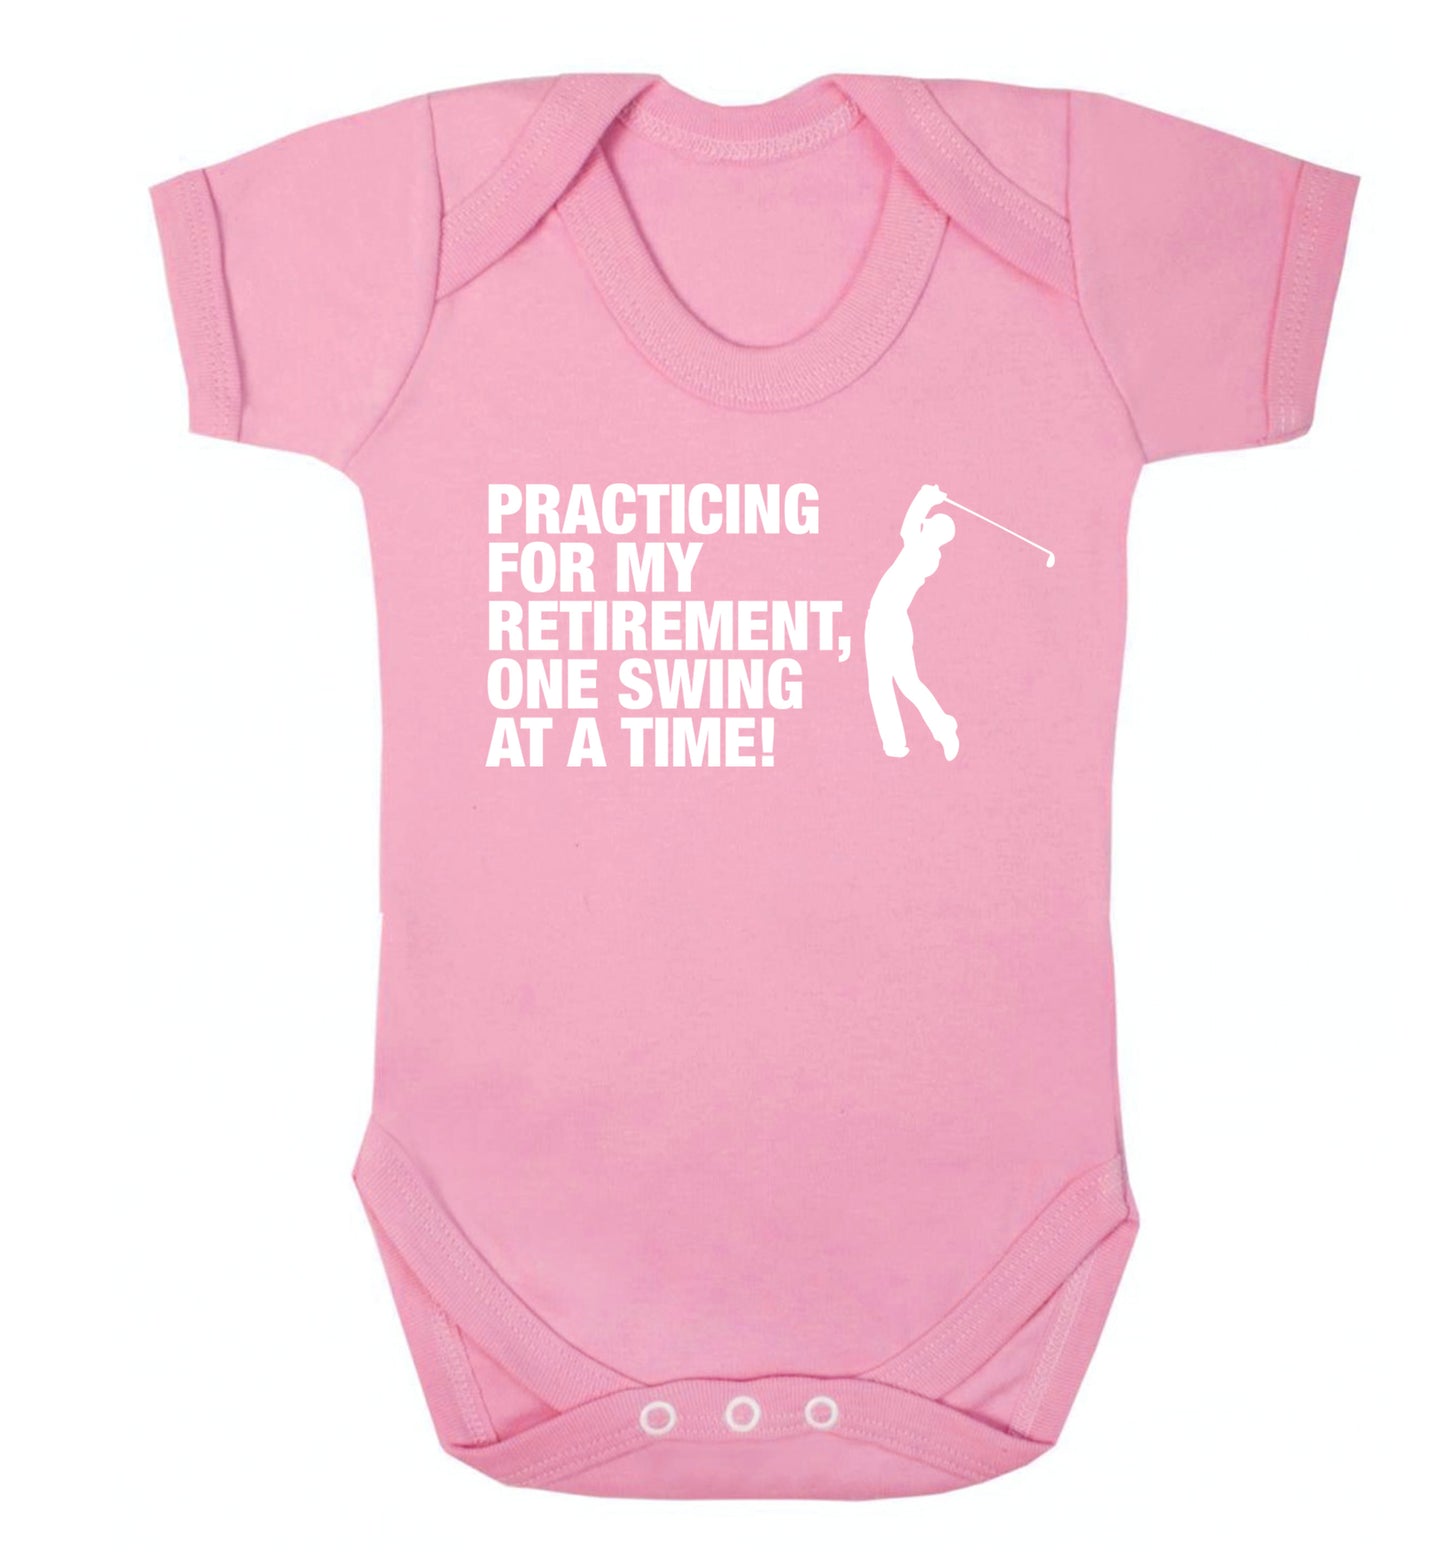 Practicing for my retirement one swing at a time Baby Vest pale pink 18-24 months